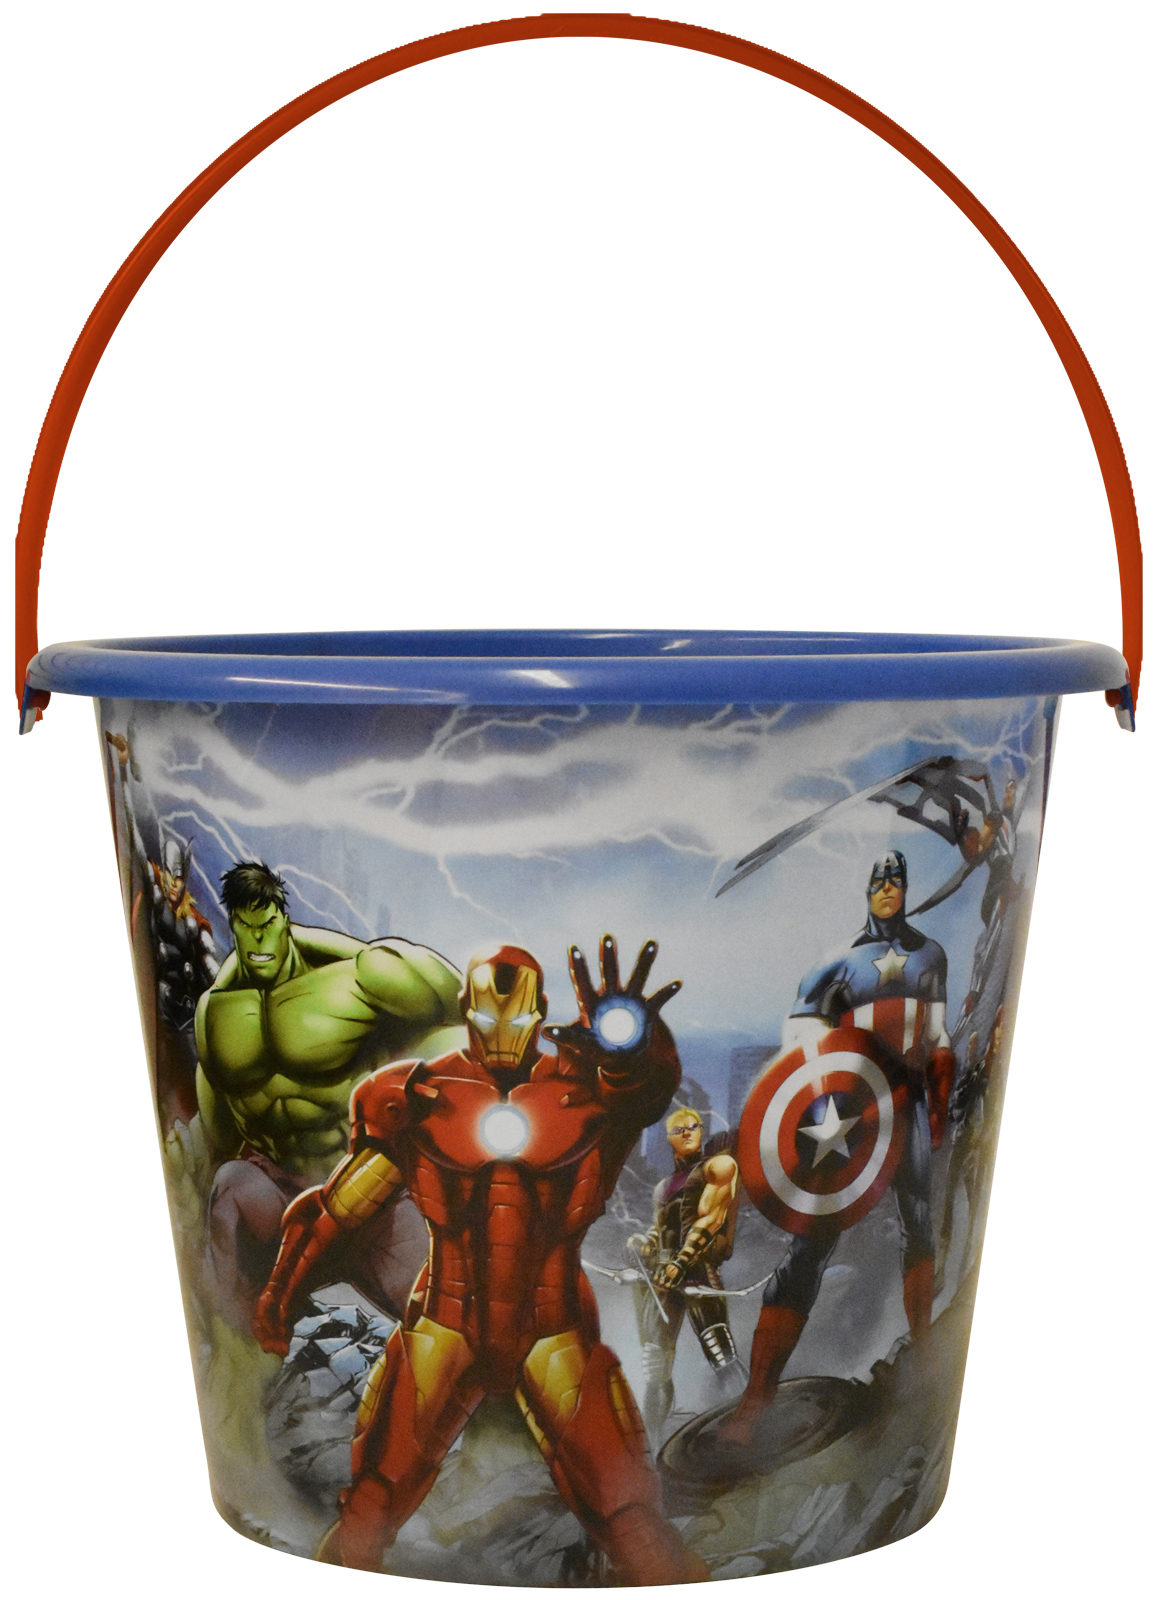 Easter Avengers Pail - image 2 of 2